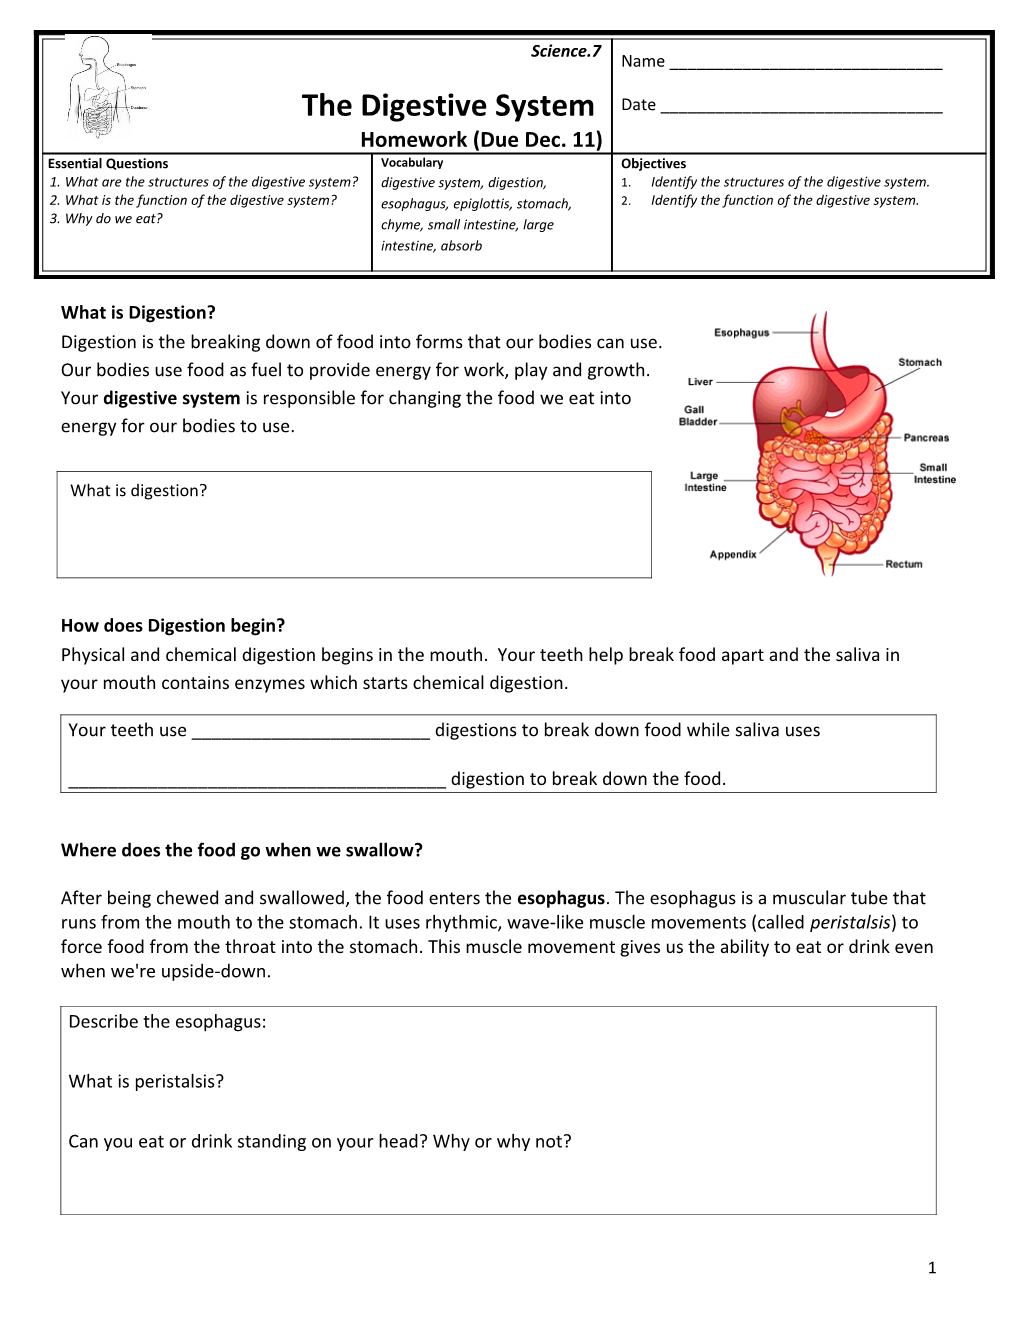 What Are the Structures of the Digestive System?